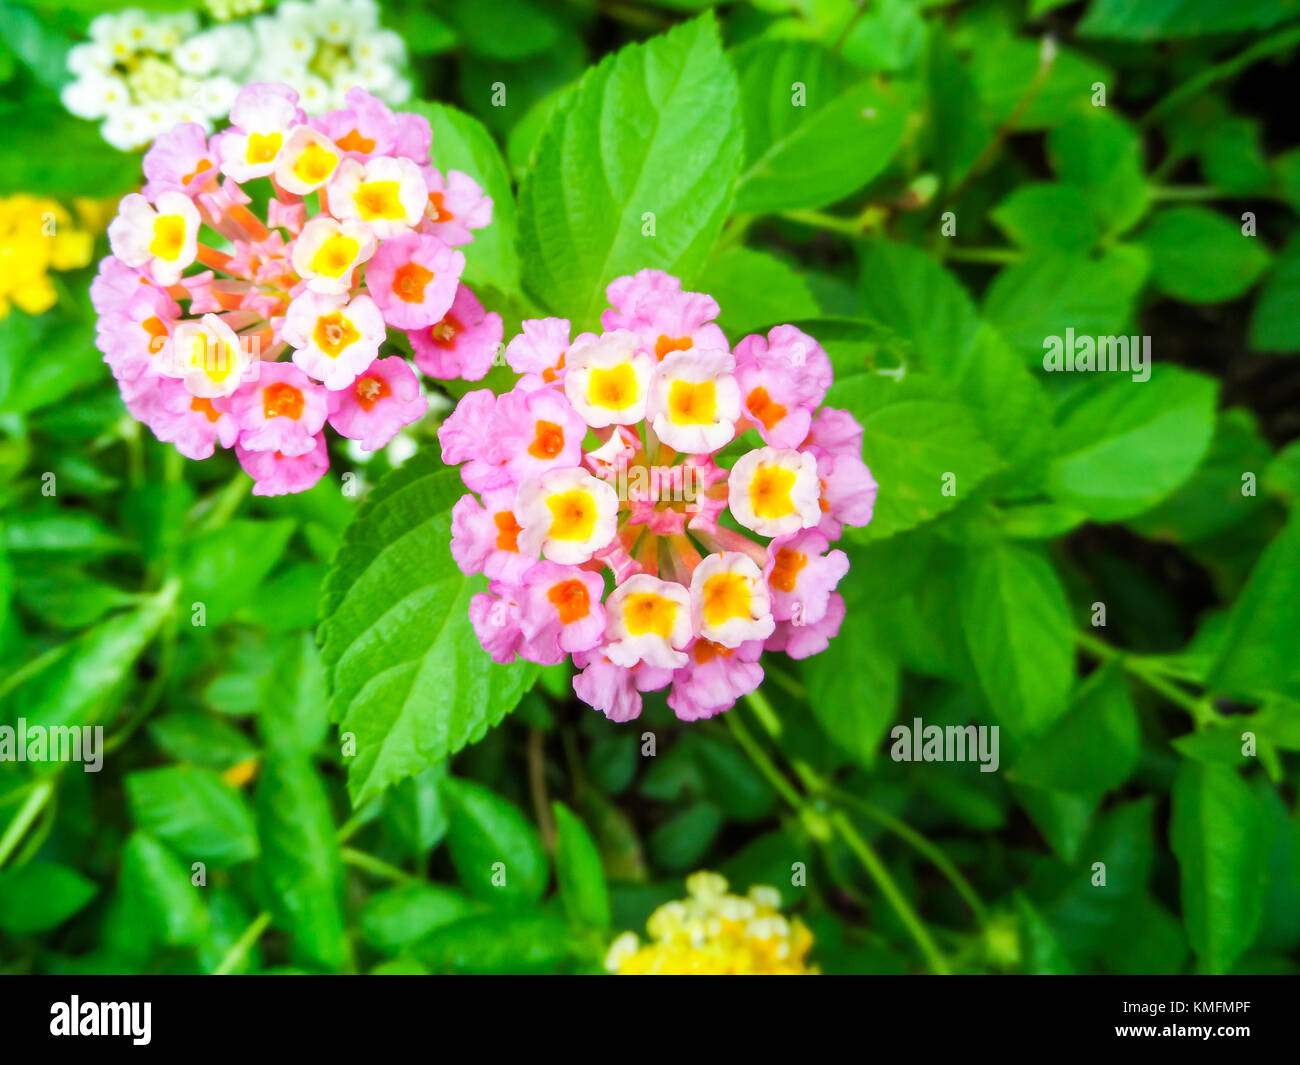 Lantana colorful bloom in the garden has green leaf backgroud Stock Photo